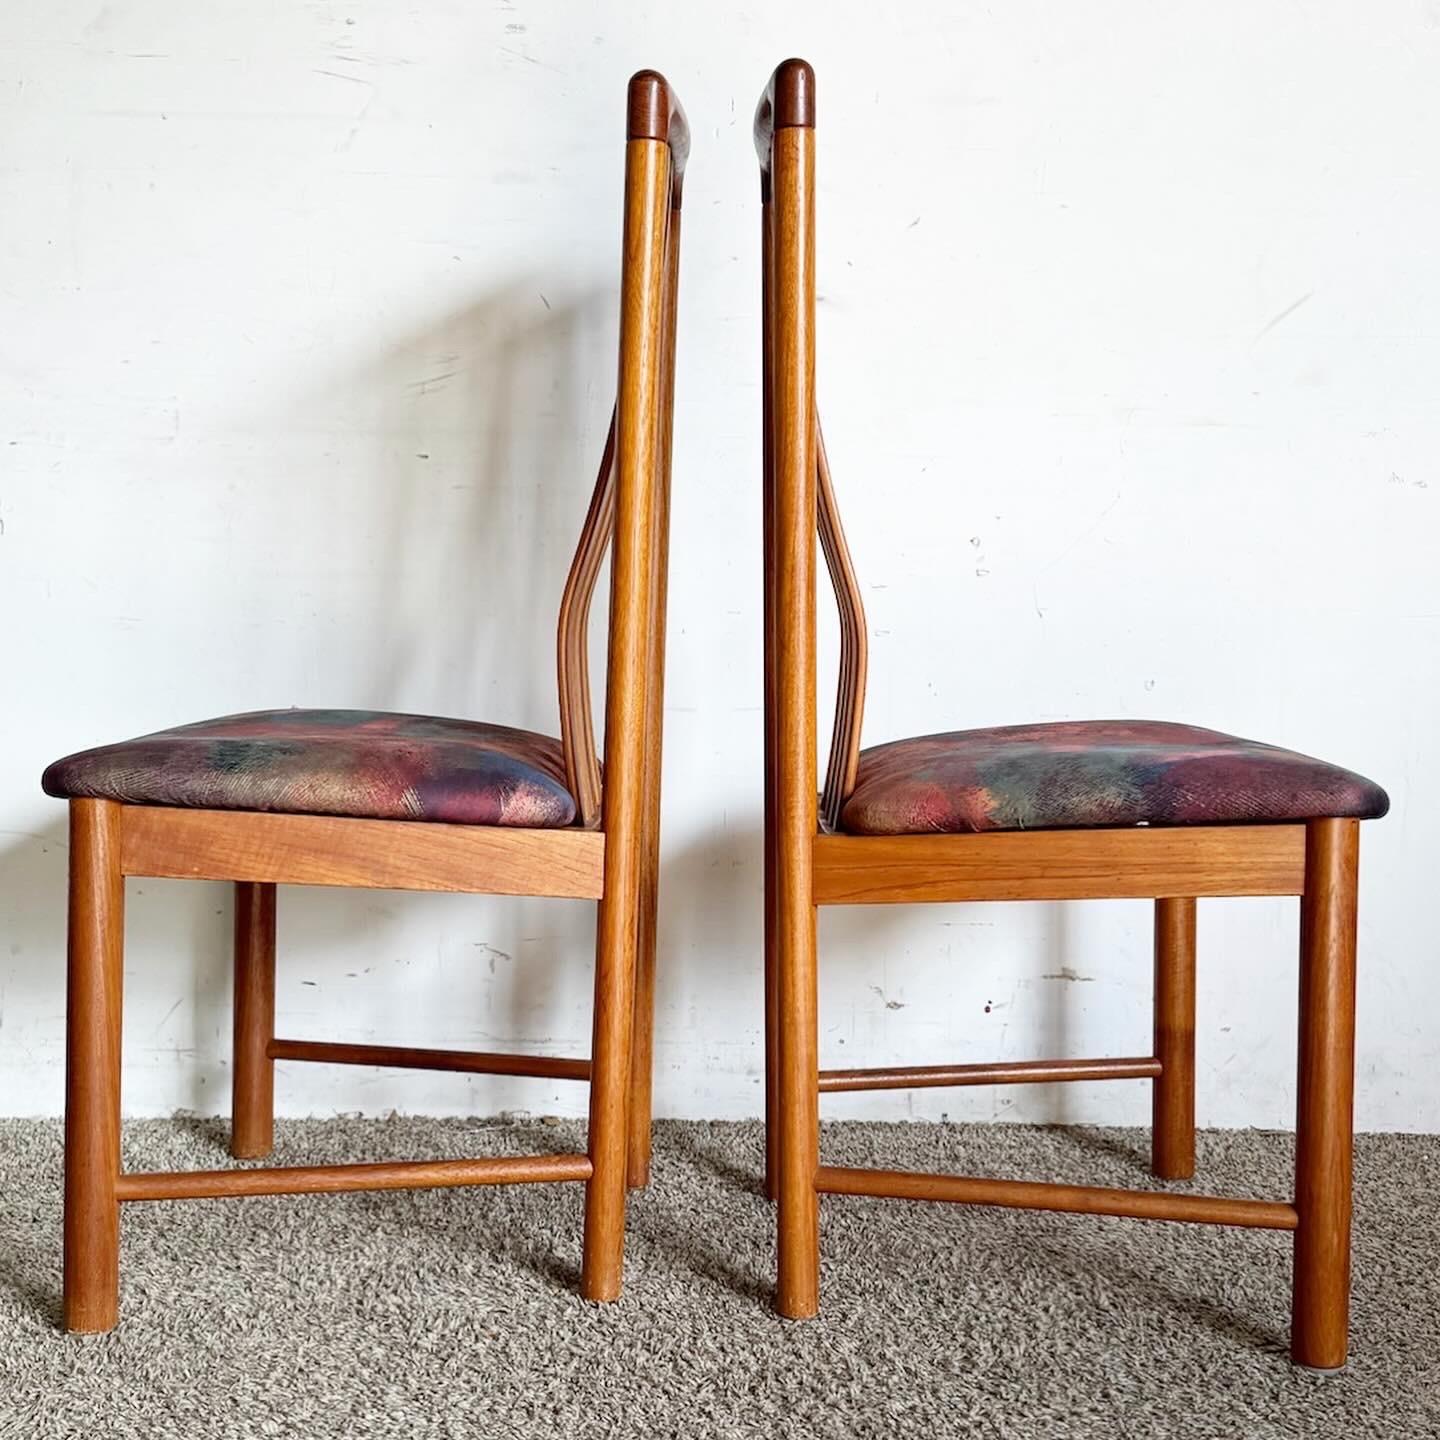 Danish Mid Century Modern Dining Chairs by Boltinge - Set of 4 In Good Condition For Sale In Delray Beach, FL